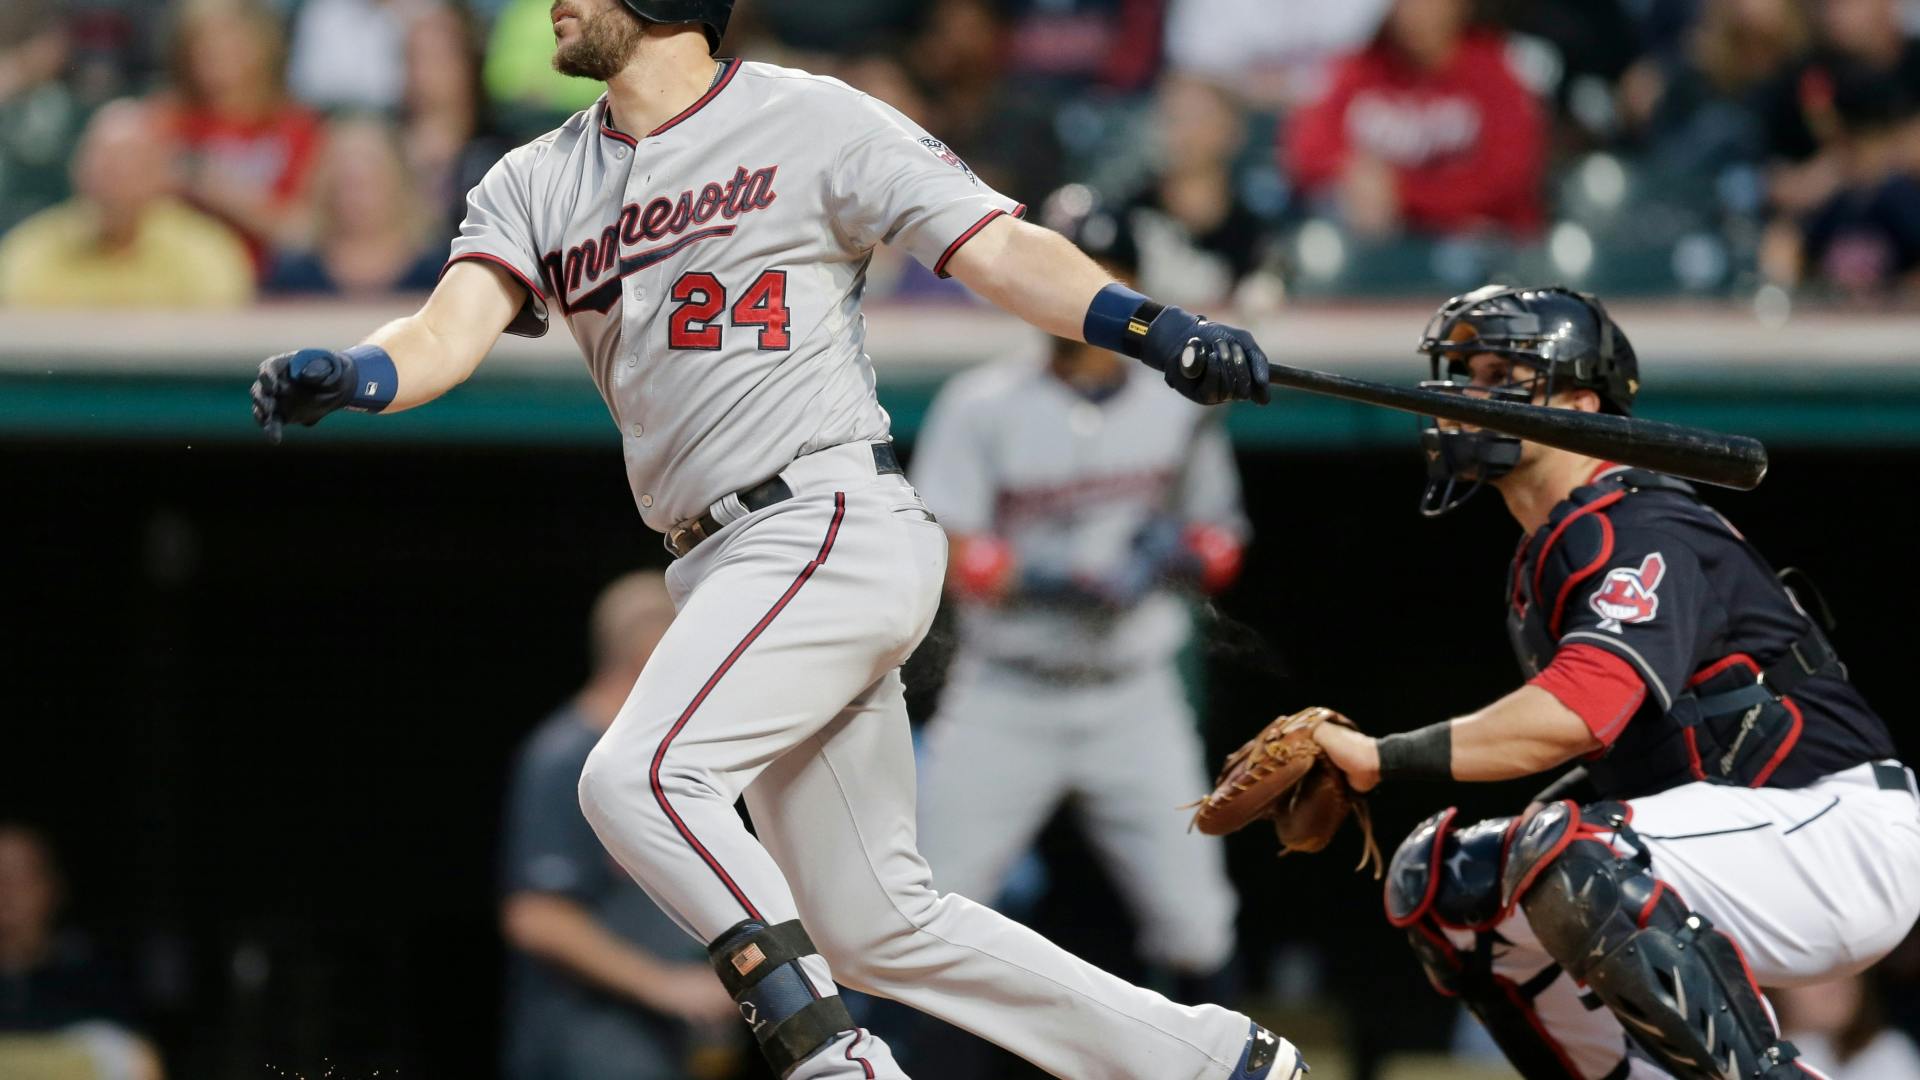 The Twins first baseman hit a two- run homer in first inning on Monday.